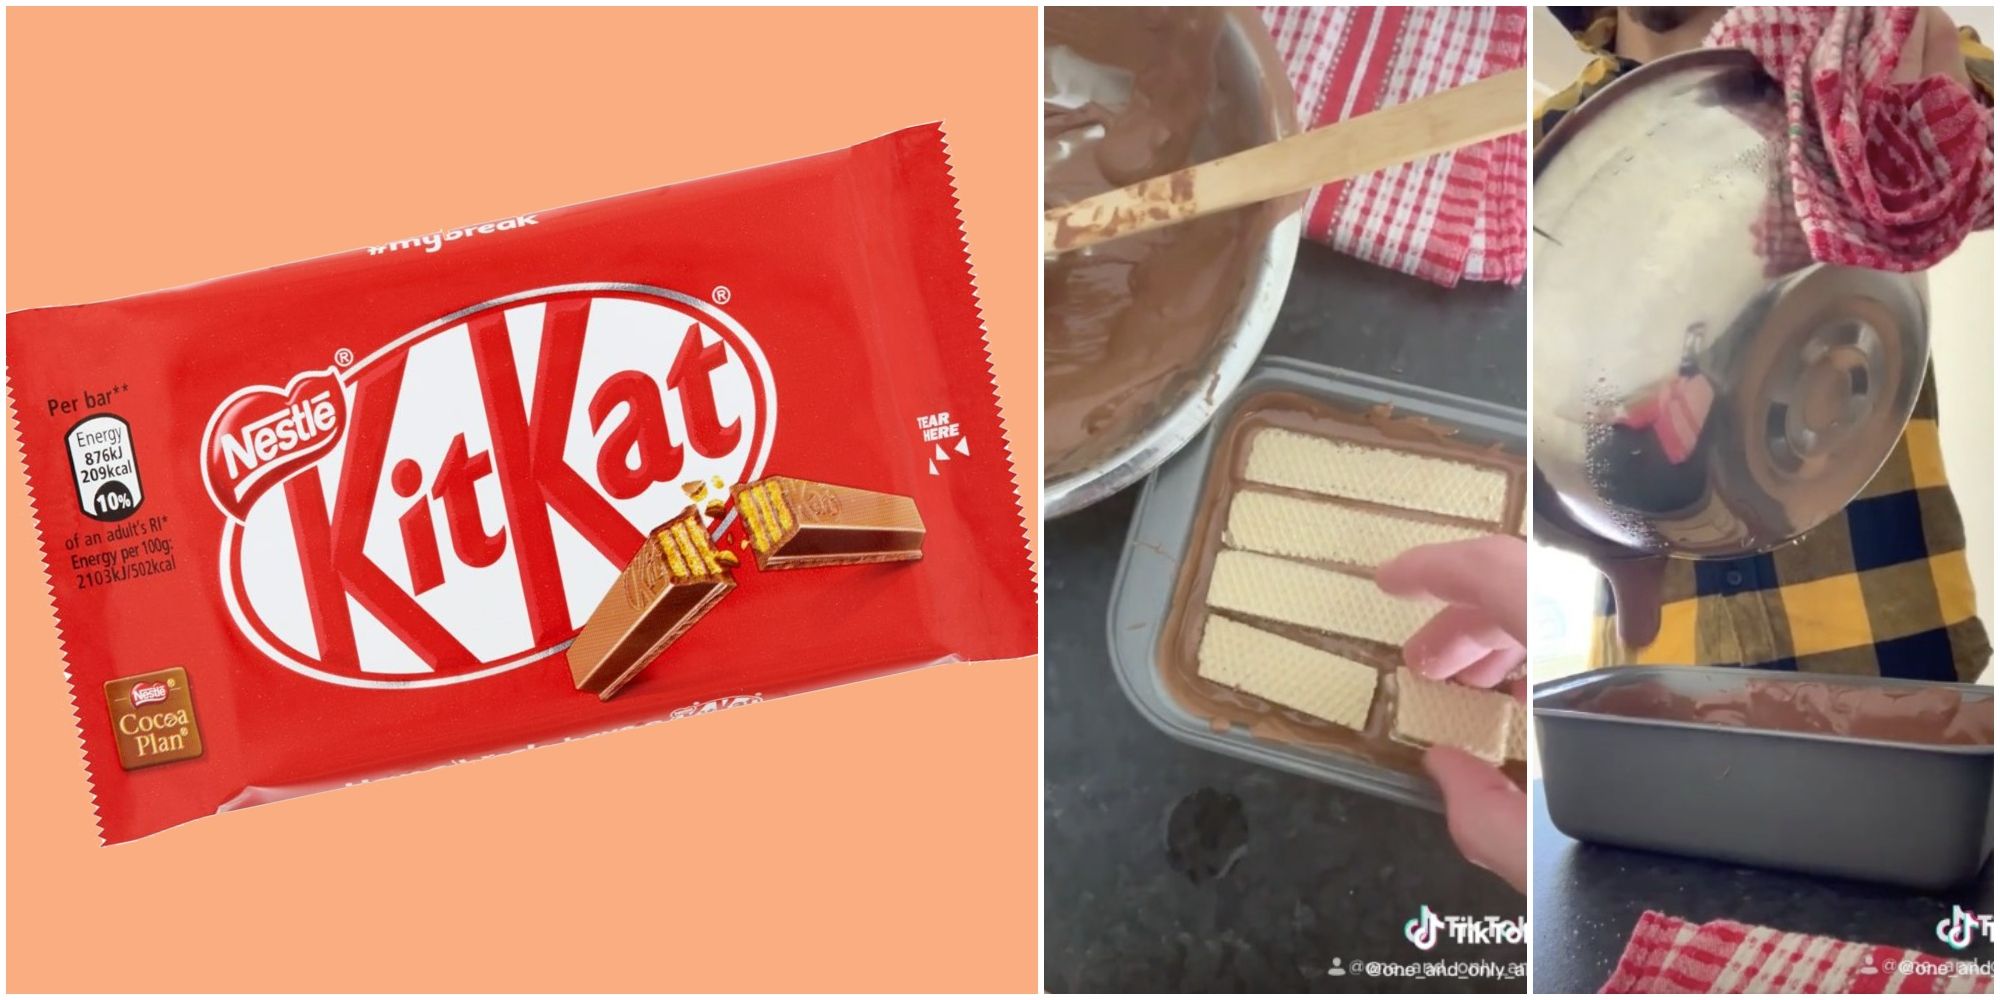 Vi ses overdrive skud Someone Made A GIANT Kitkat With Just Two Ingredients And We're Obsessed